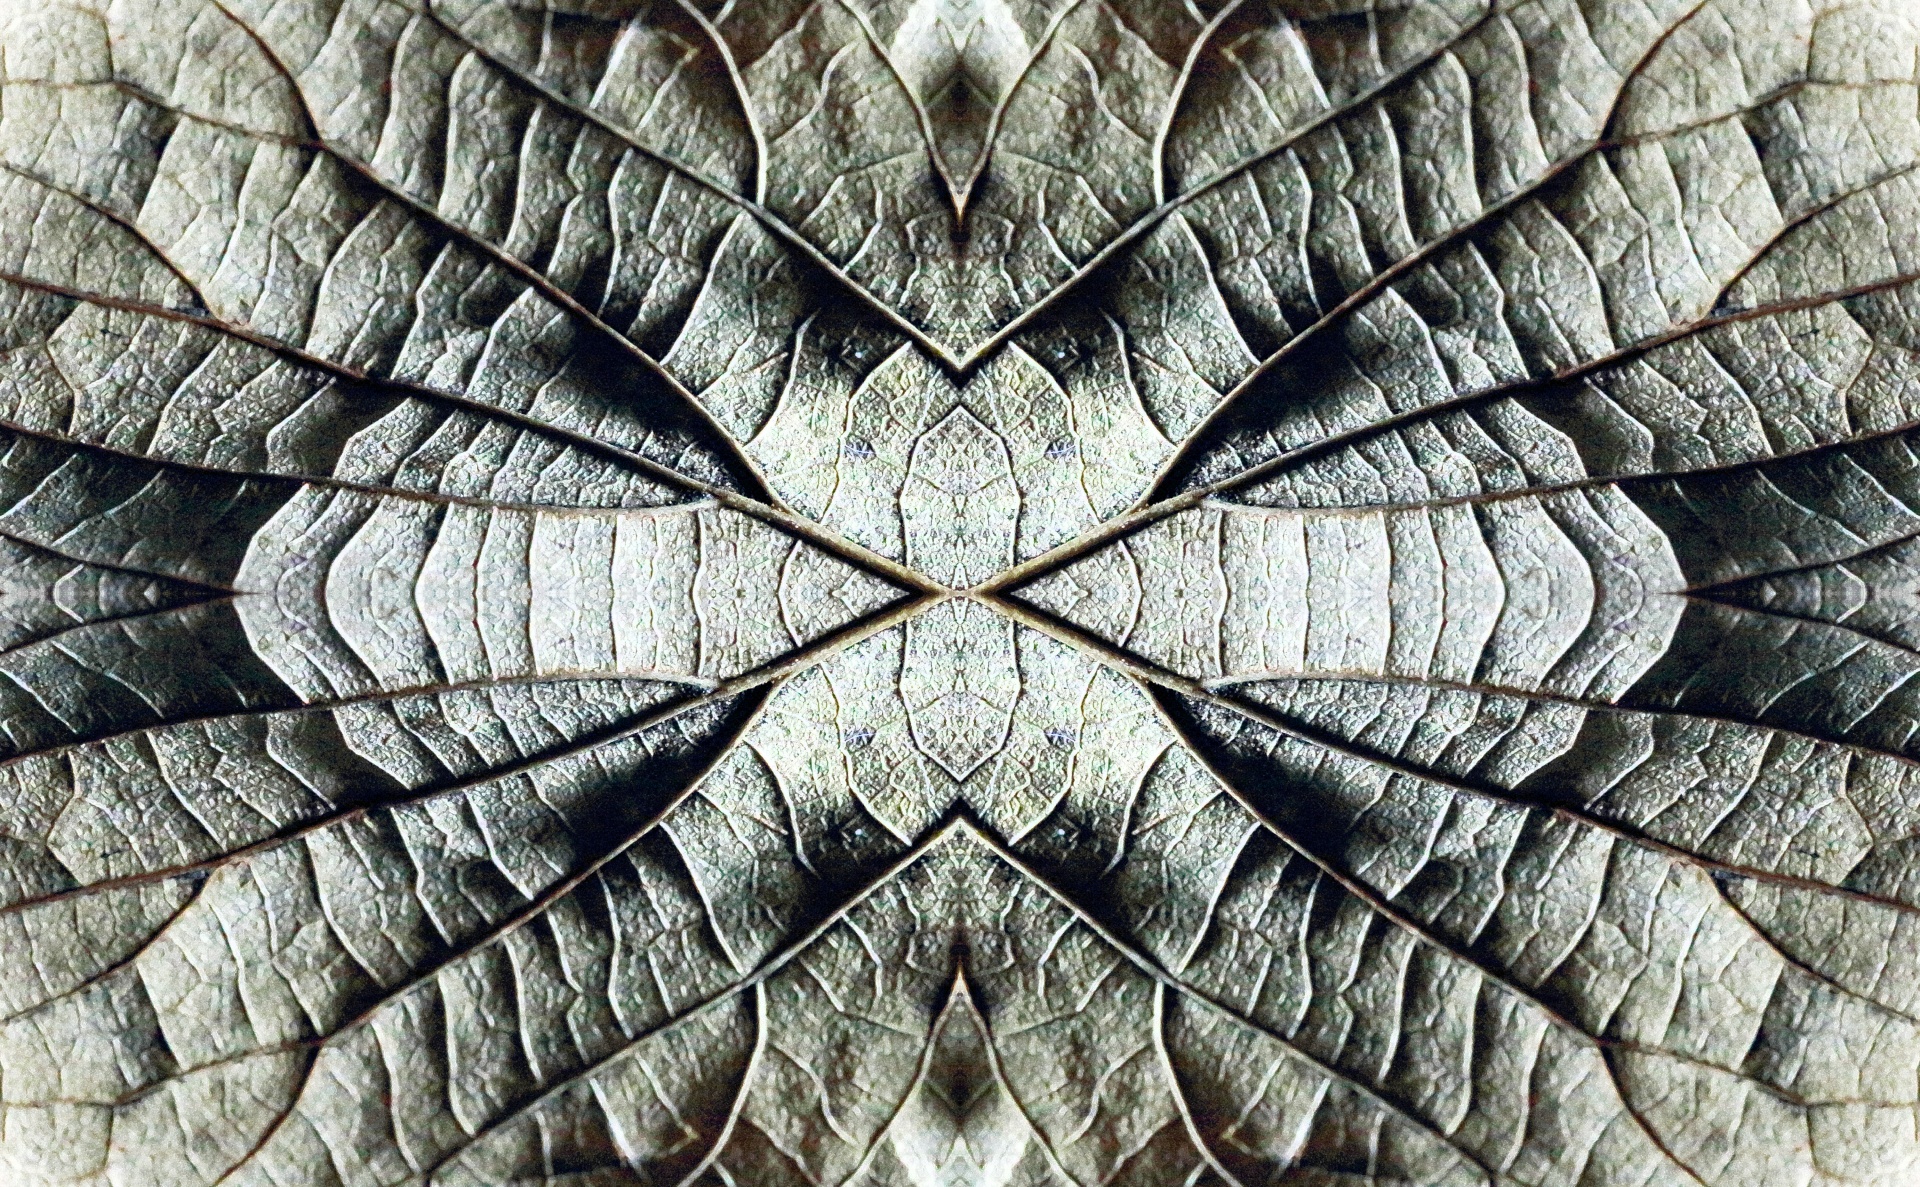 Abstract Network Pattern Of A Leaf